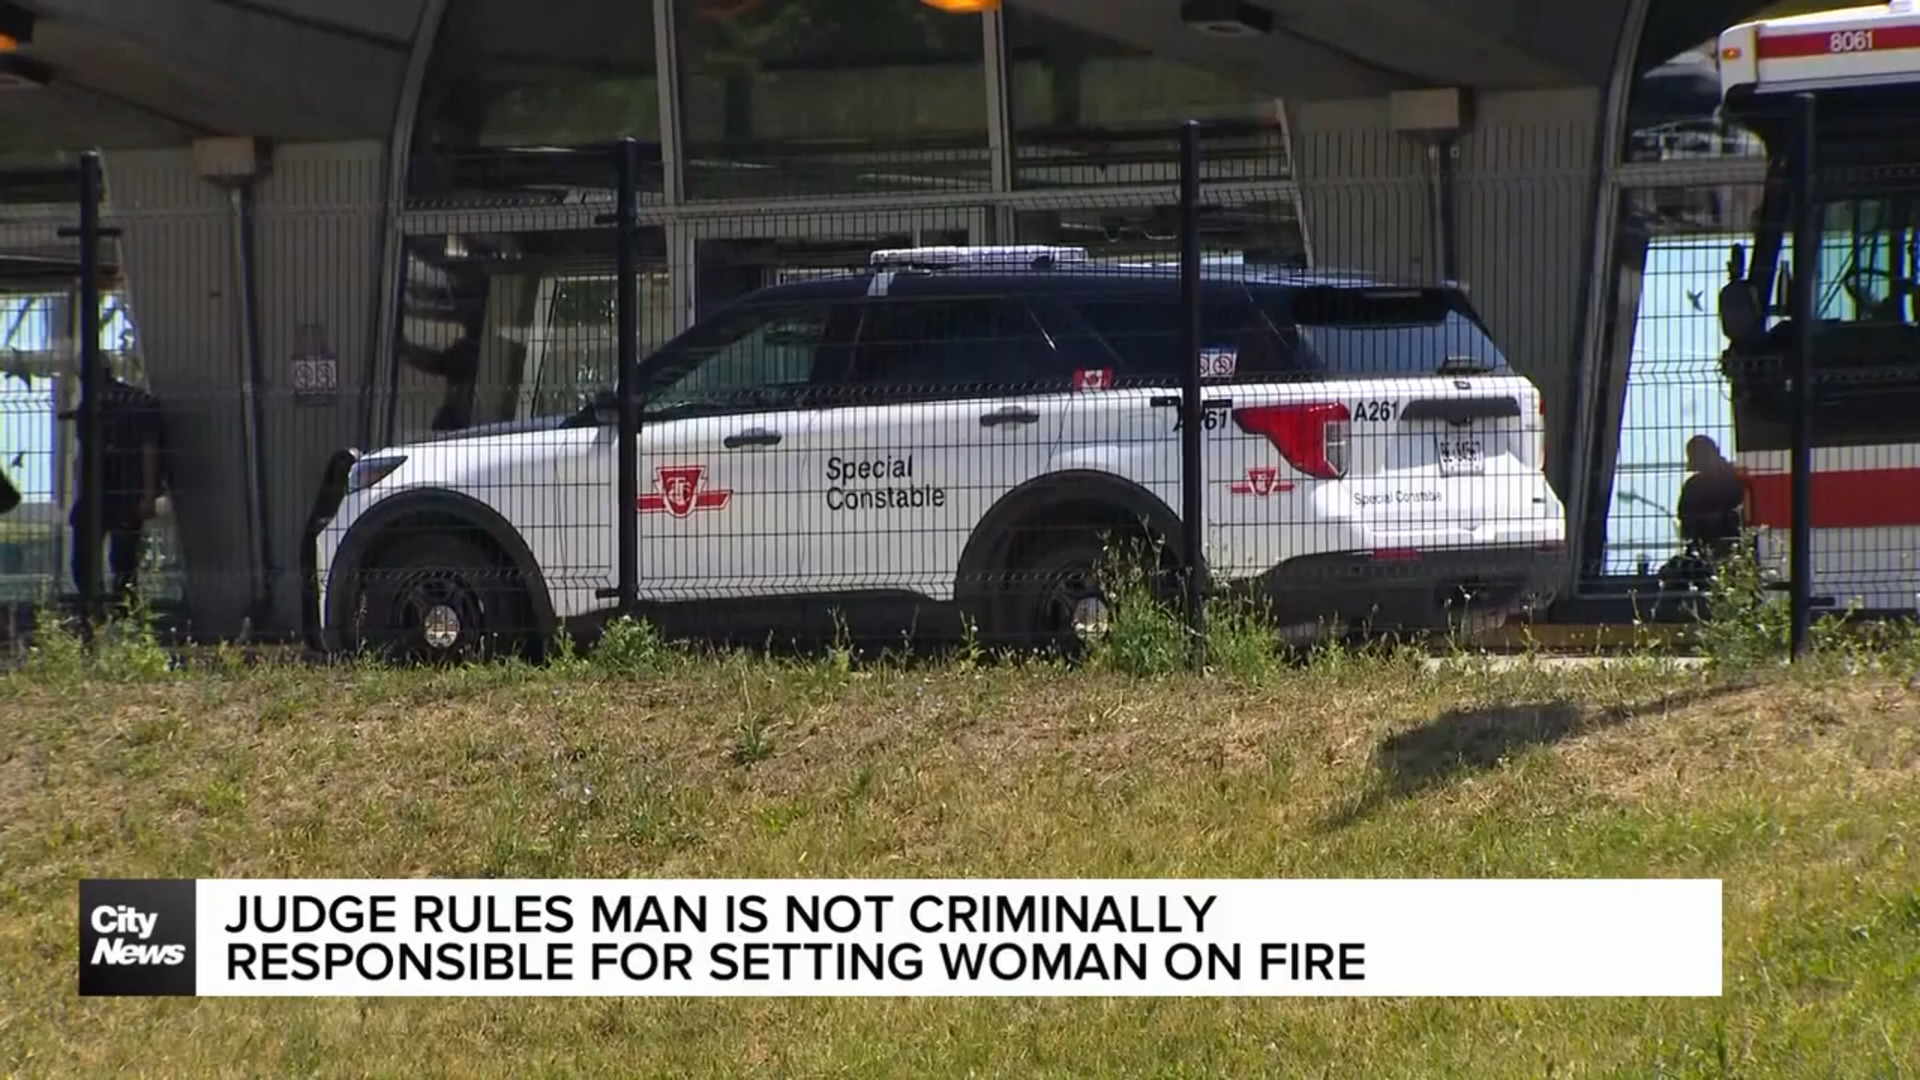 Man who set woman on fire found not criminally responsible